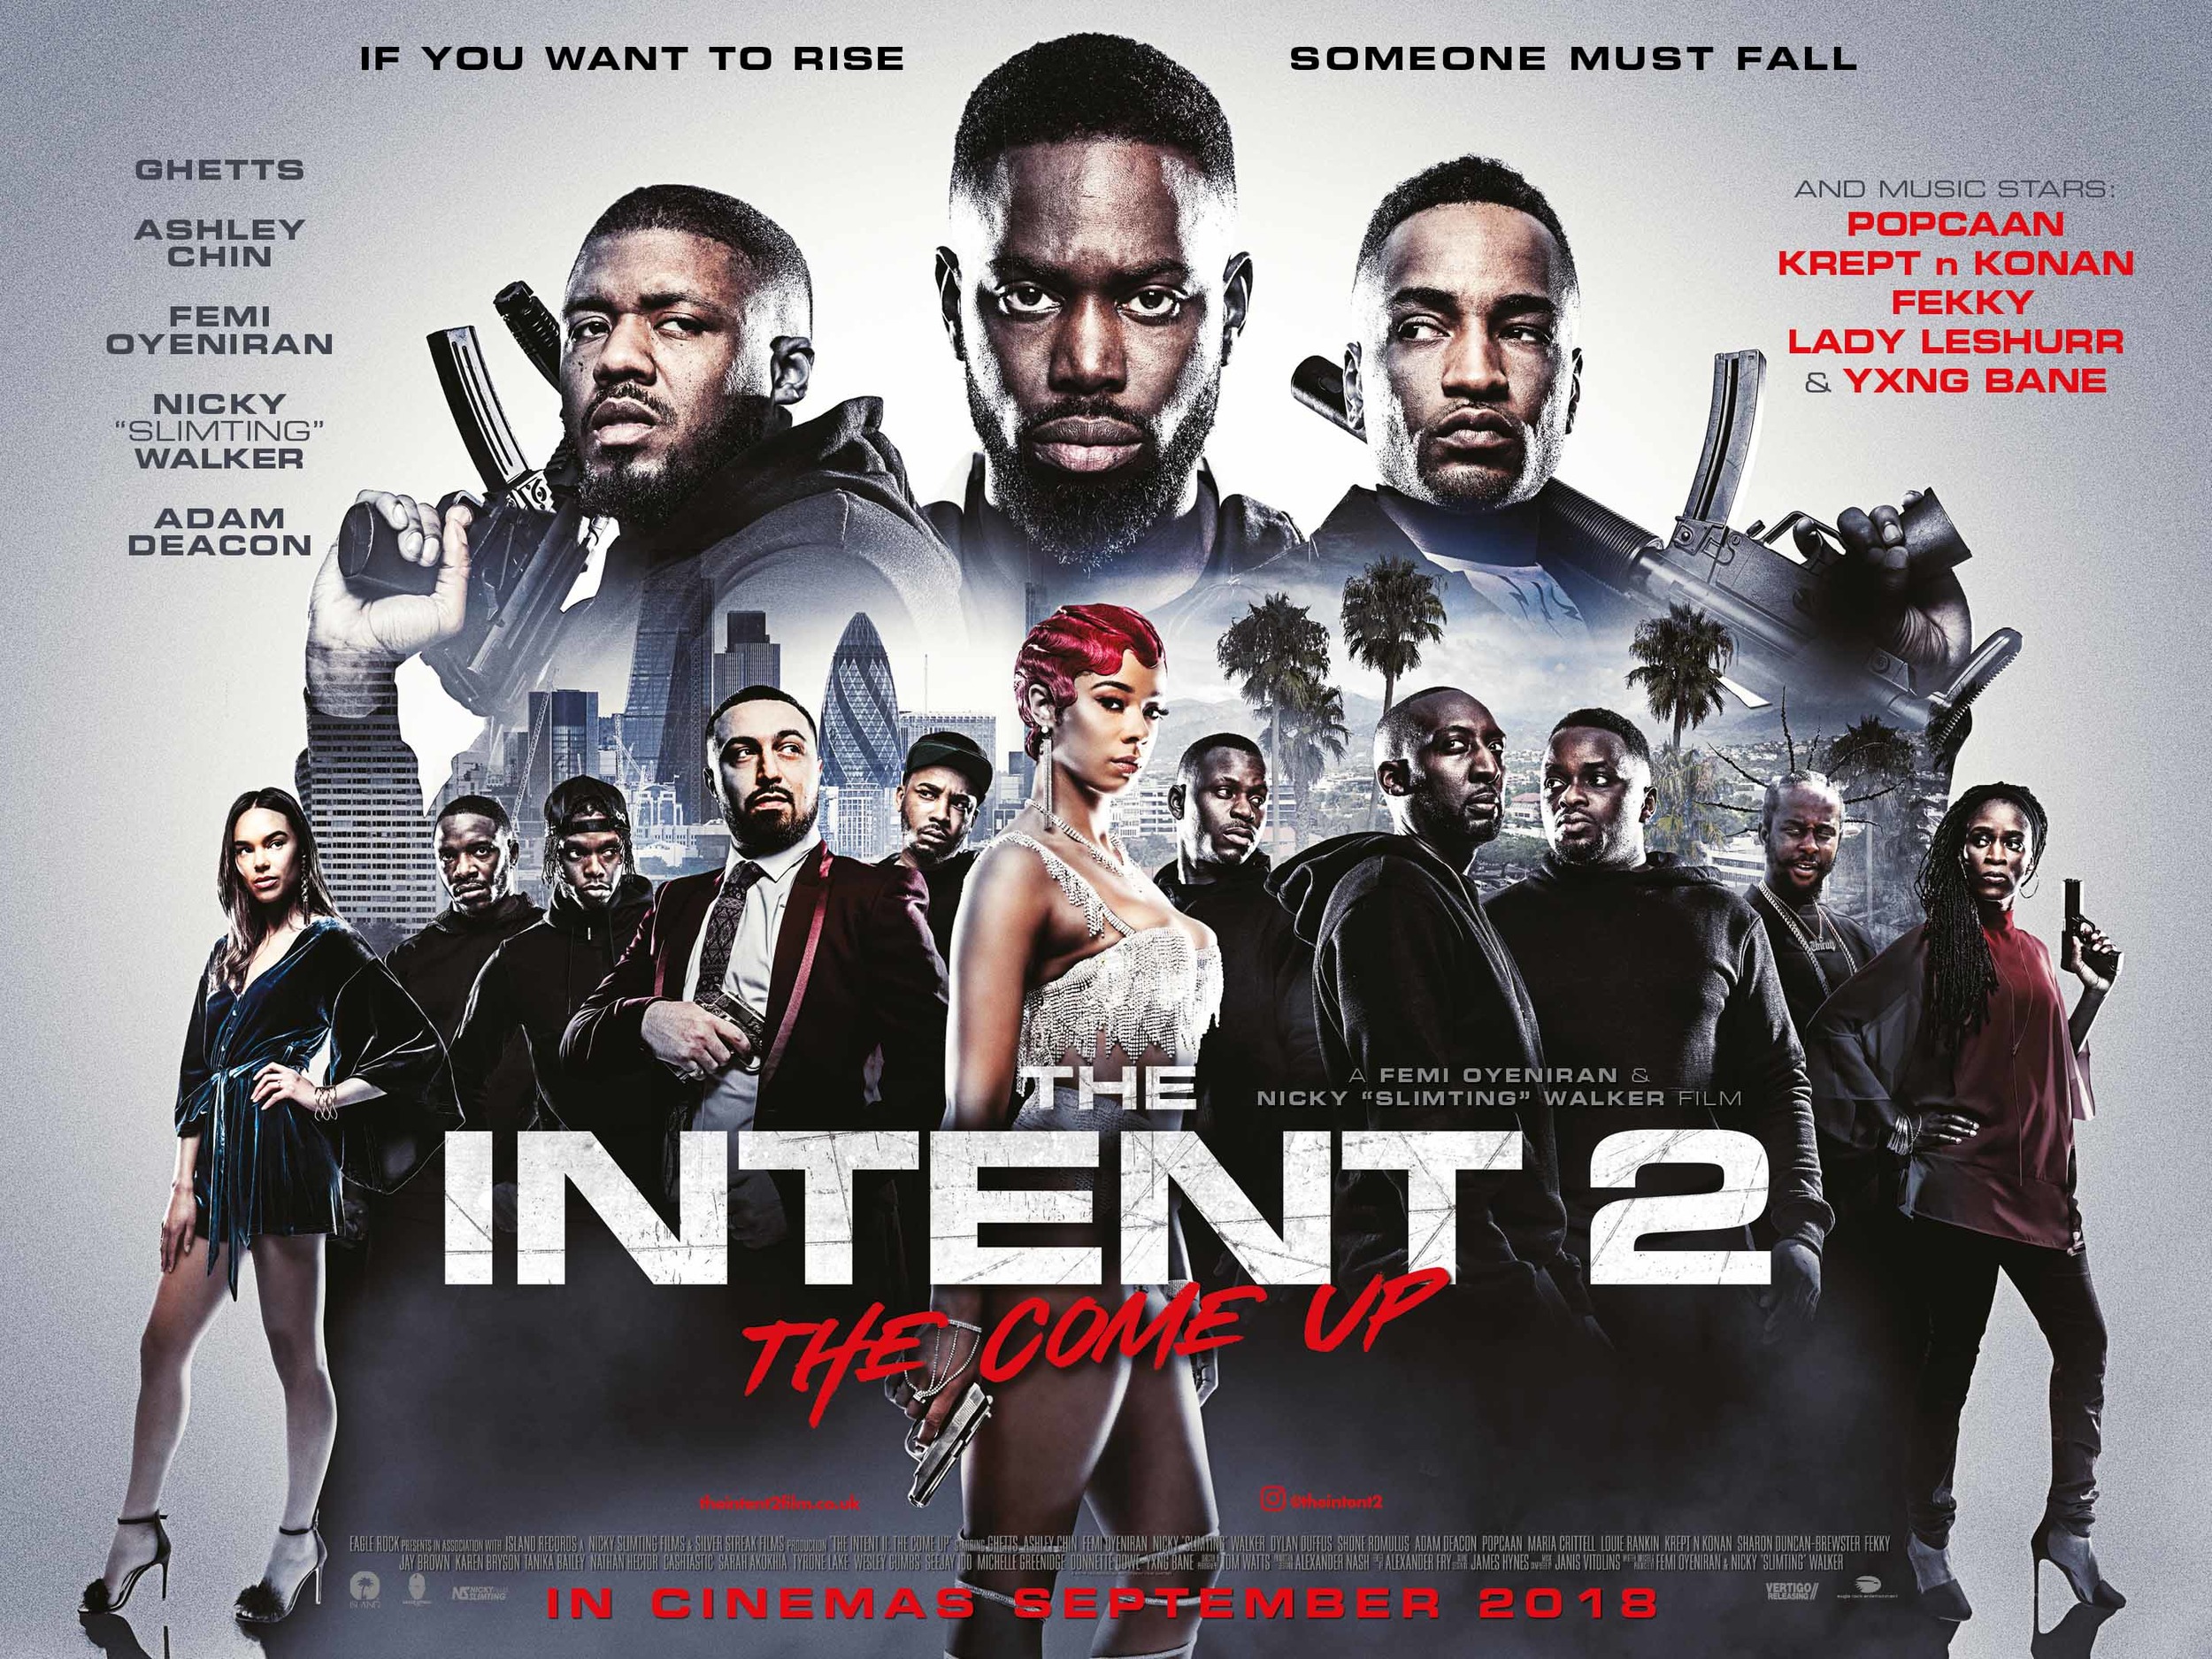 Mega Sized Movie Poster Image for The Intent 2: The Come Up 